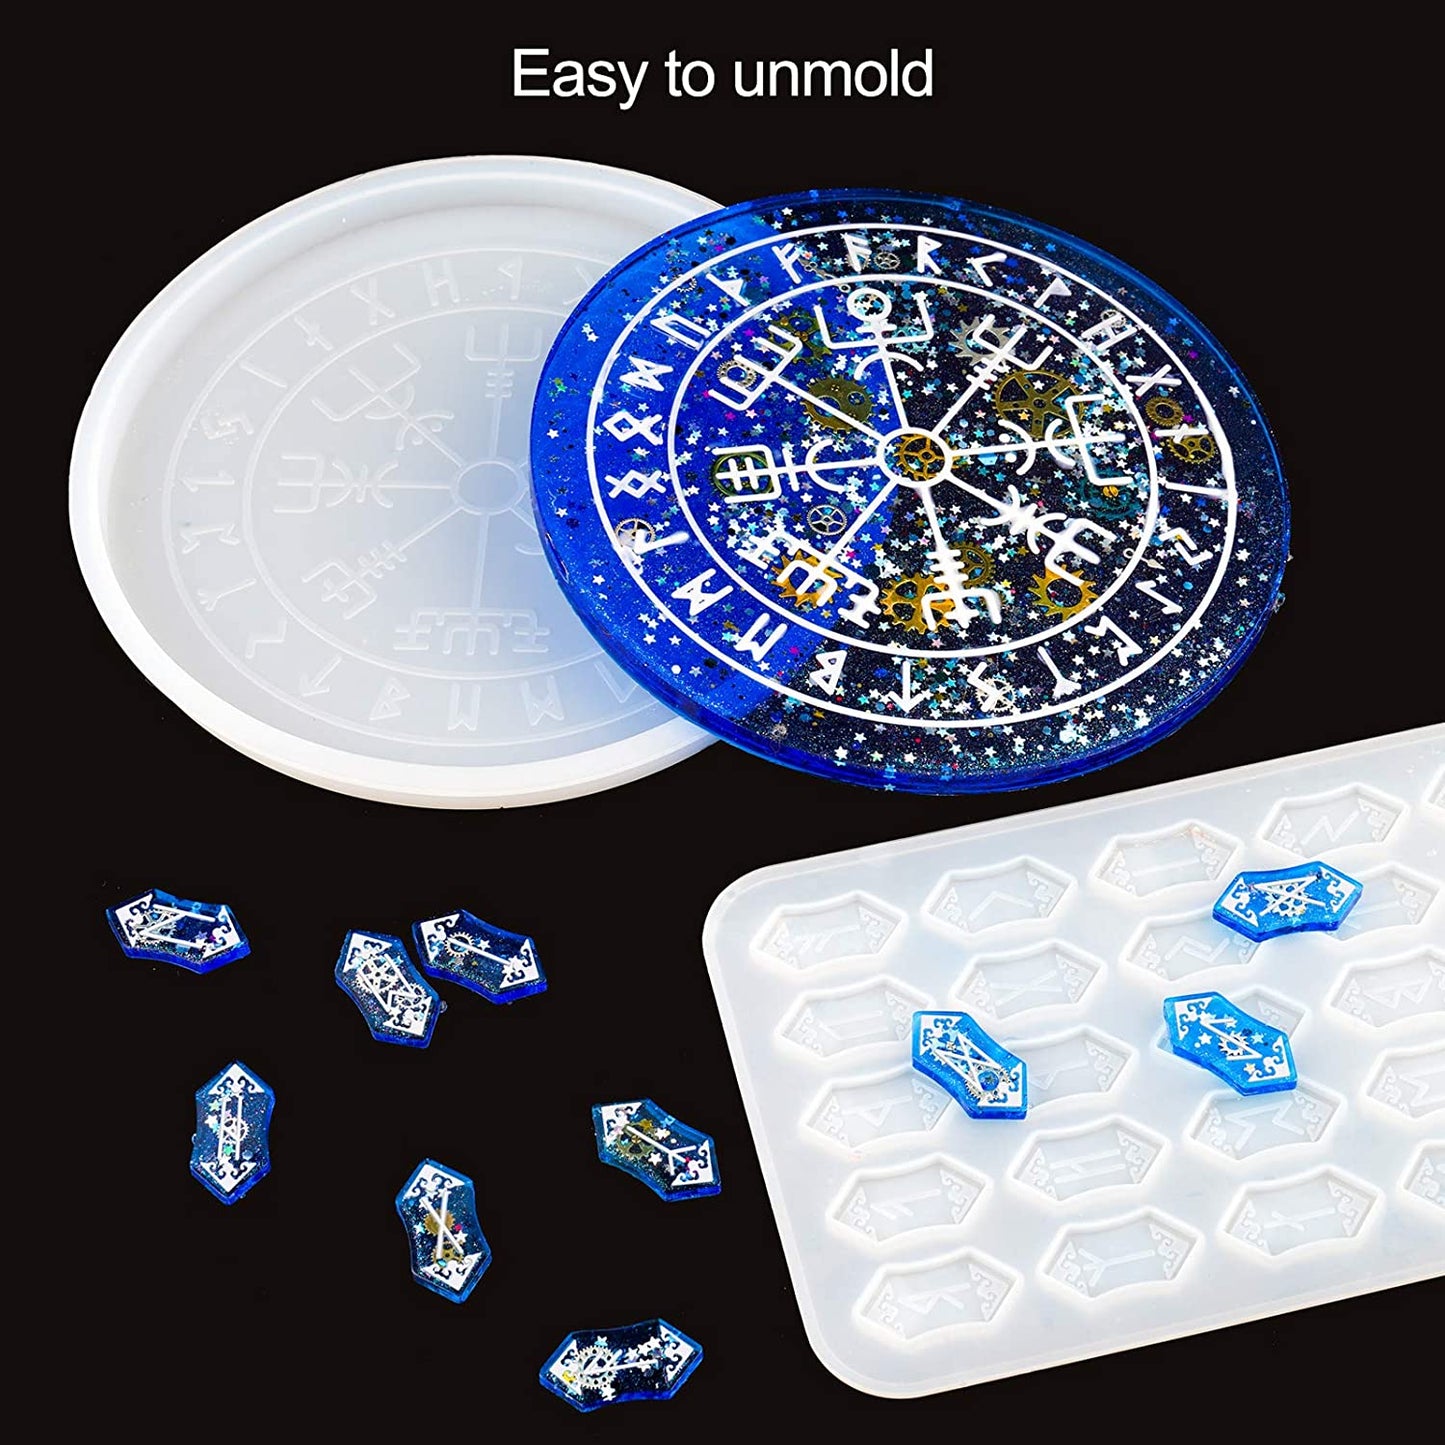 NiArt Rune Divination Resin Molds Polyhedral Dice Symbol Card Astrology Compass